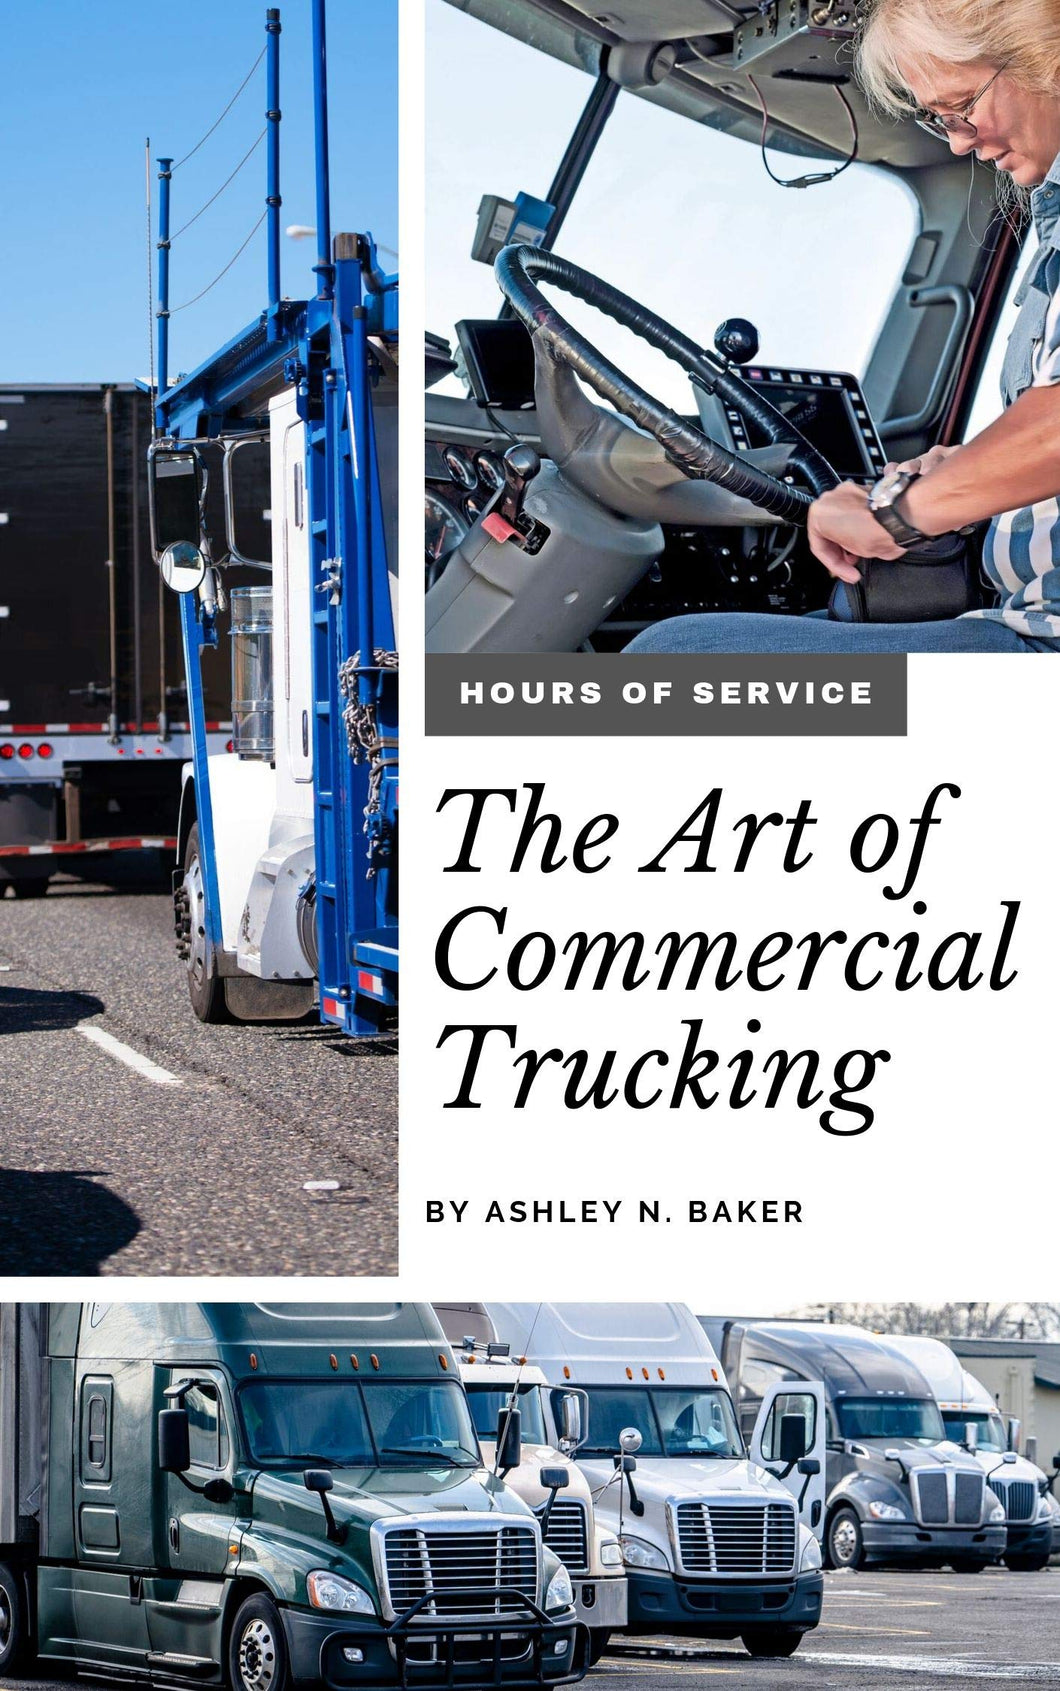 The Art of Commercial Trucking™: Hours of Service (1st Edition)